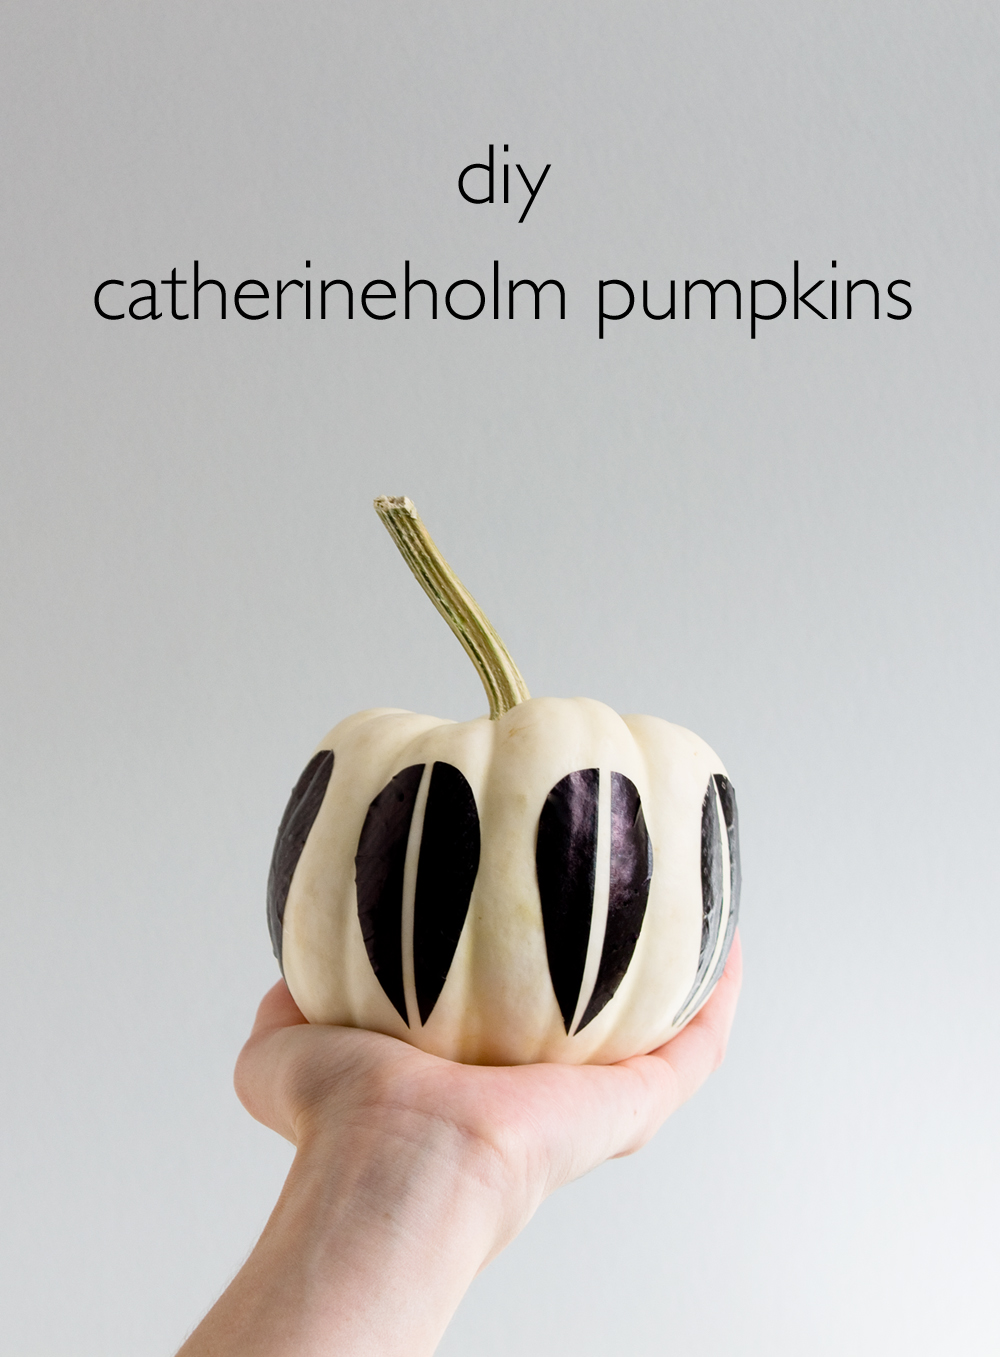 DIY Catherineholm Pumpkins | Learn how to make these mid-century style pumpkins for your Thanksgiving tablescape with just a few materials | www.vitaminihandmade.com